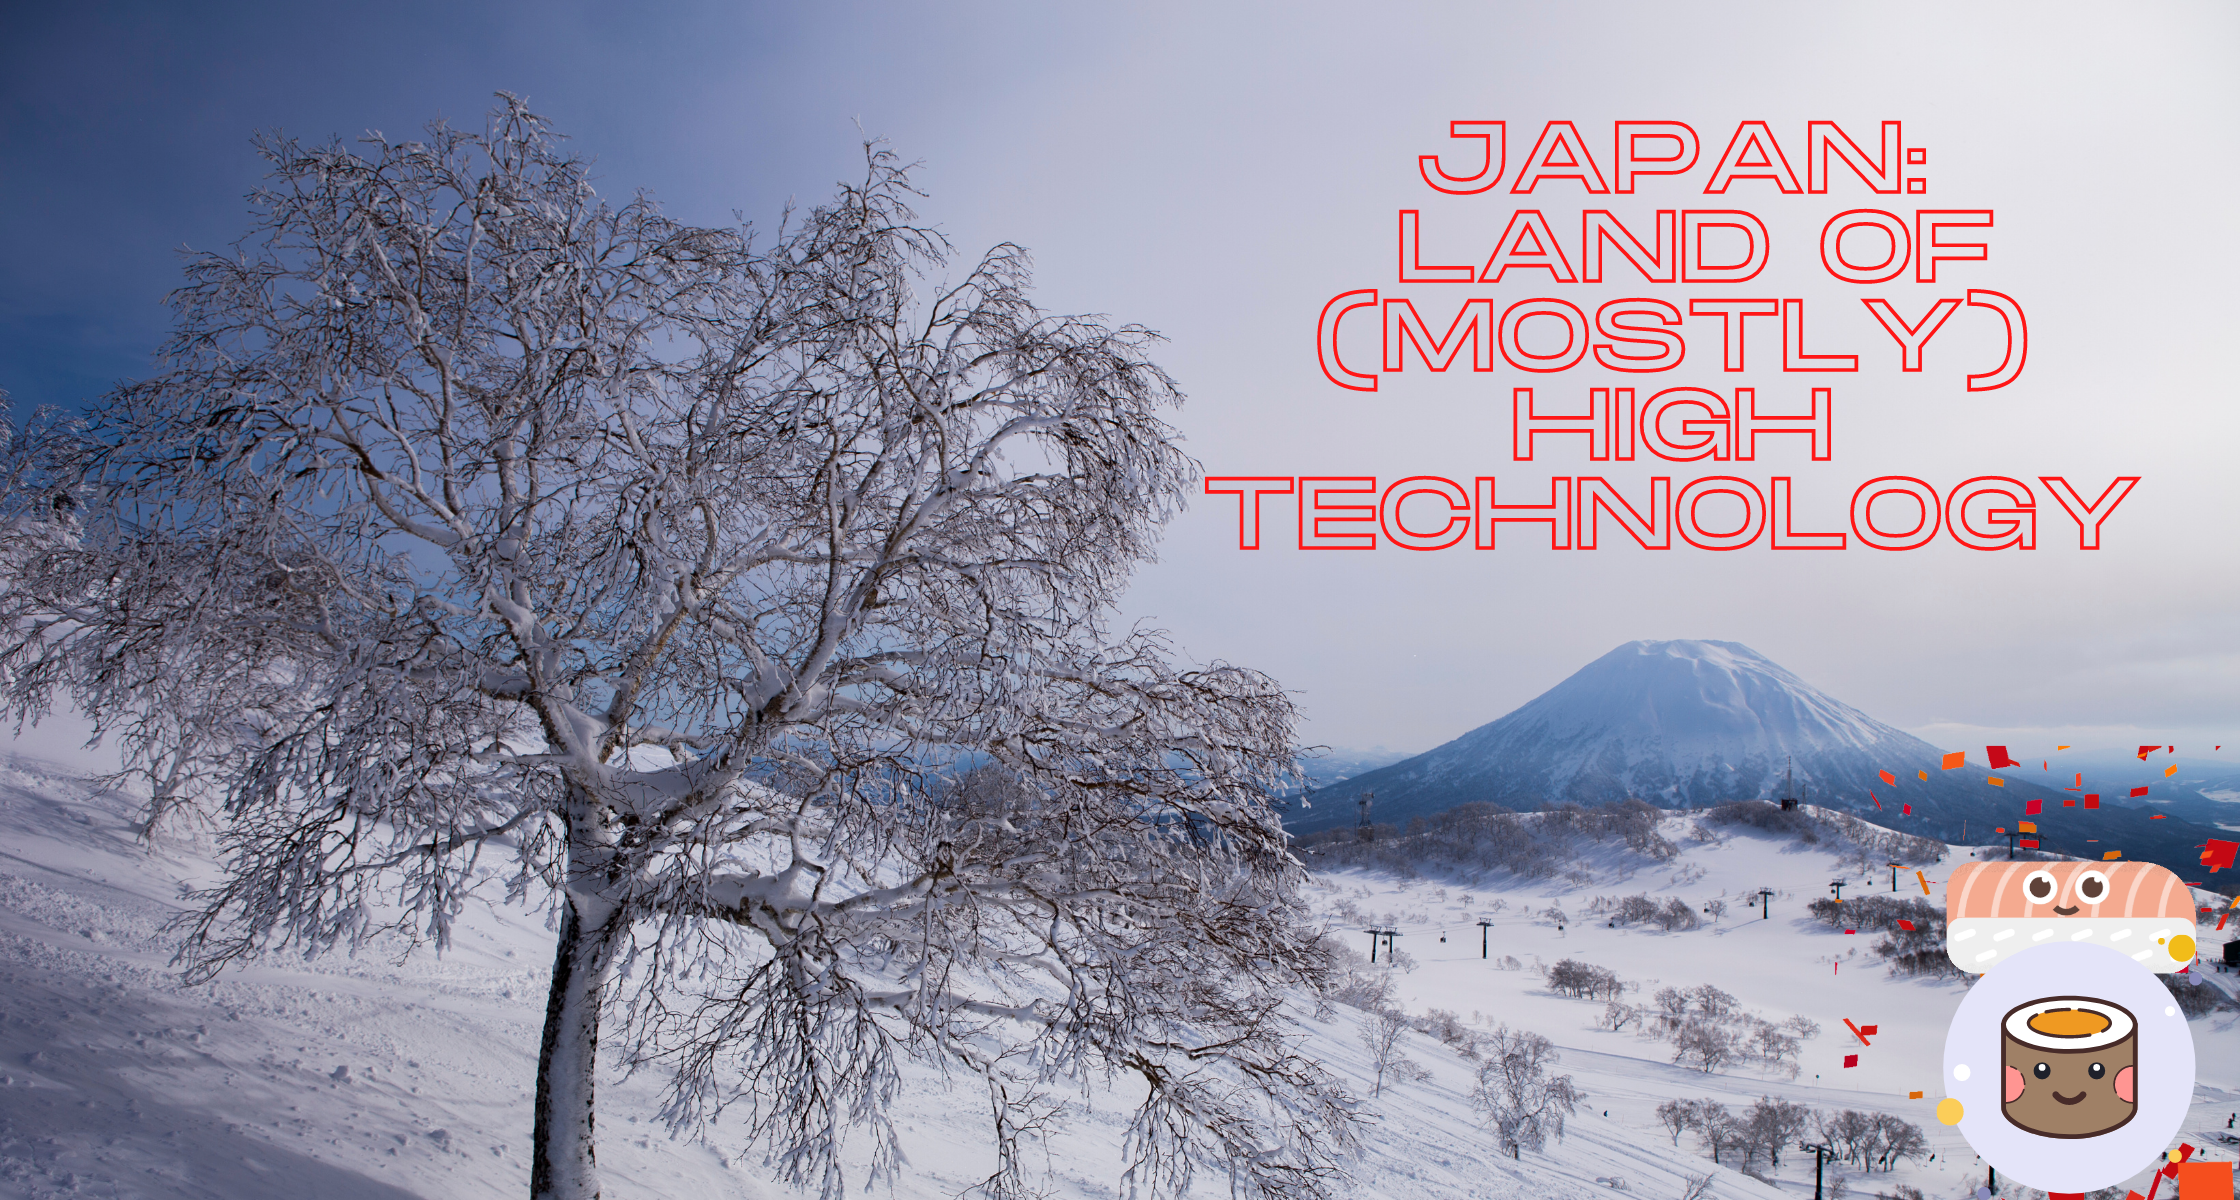 Japan Land of (mostly) High Technology